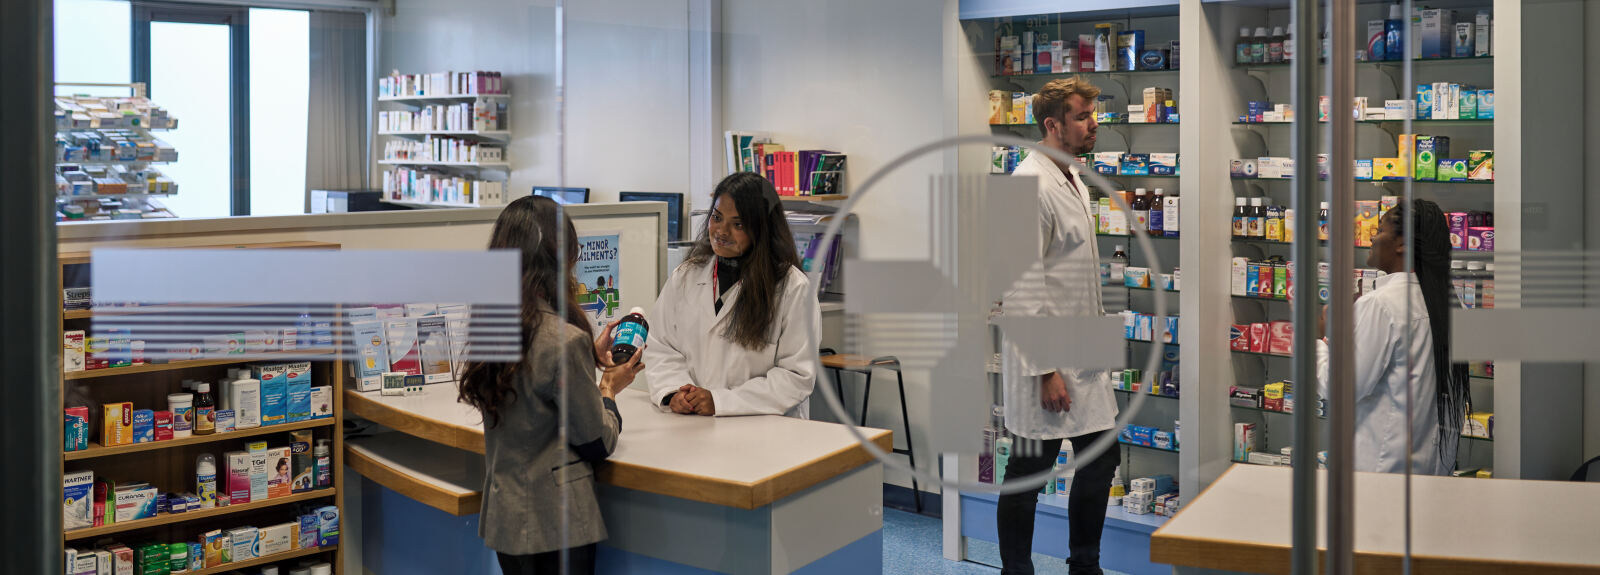 Students studying in a pharmacy shop